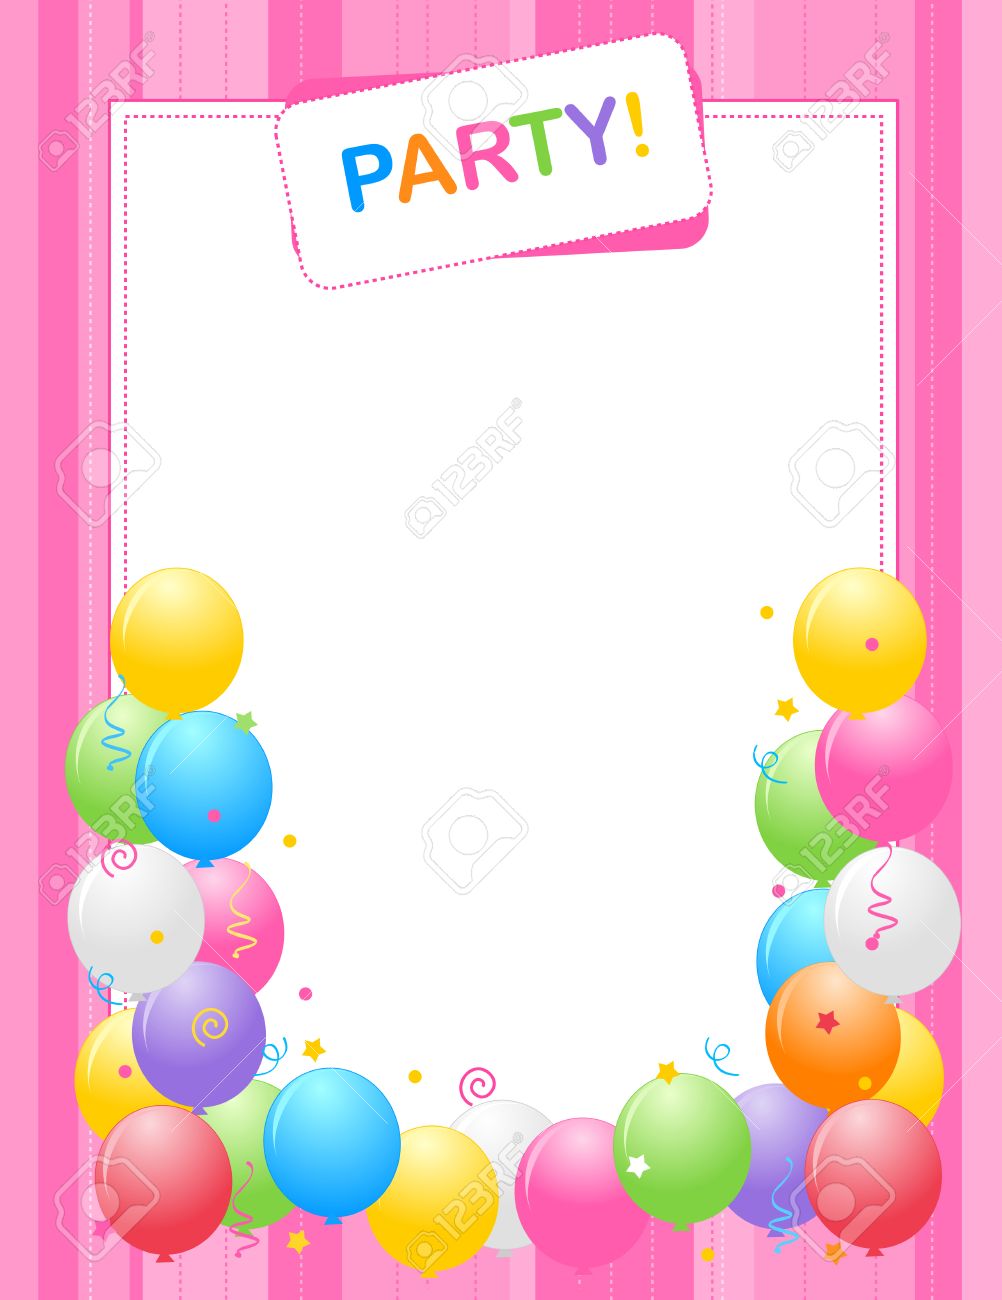 Birthday Party Border | Free download on ClipArtMag